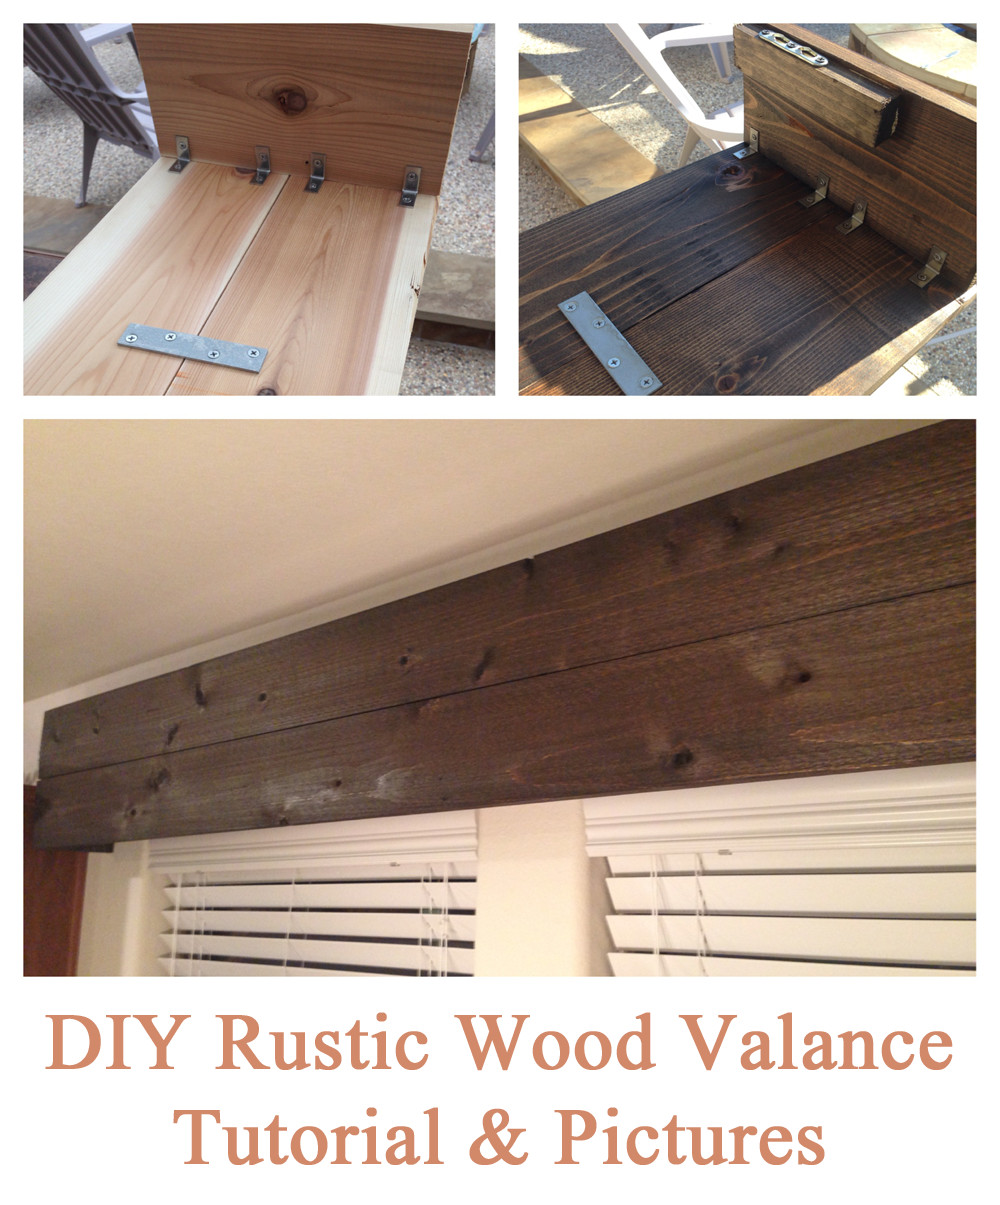 DIY Wooden Valance
 Easy DIY tutorial for creating a rustic wood valance the